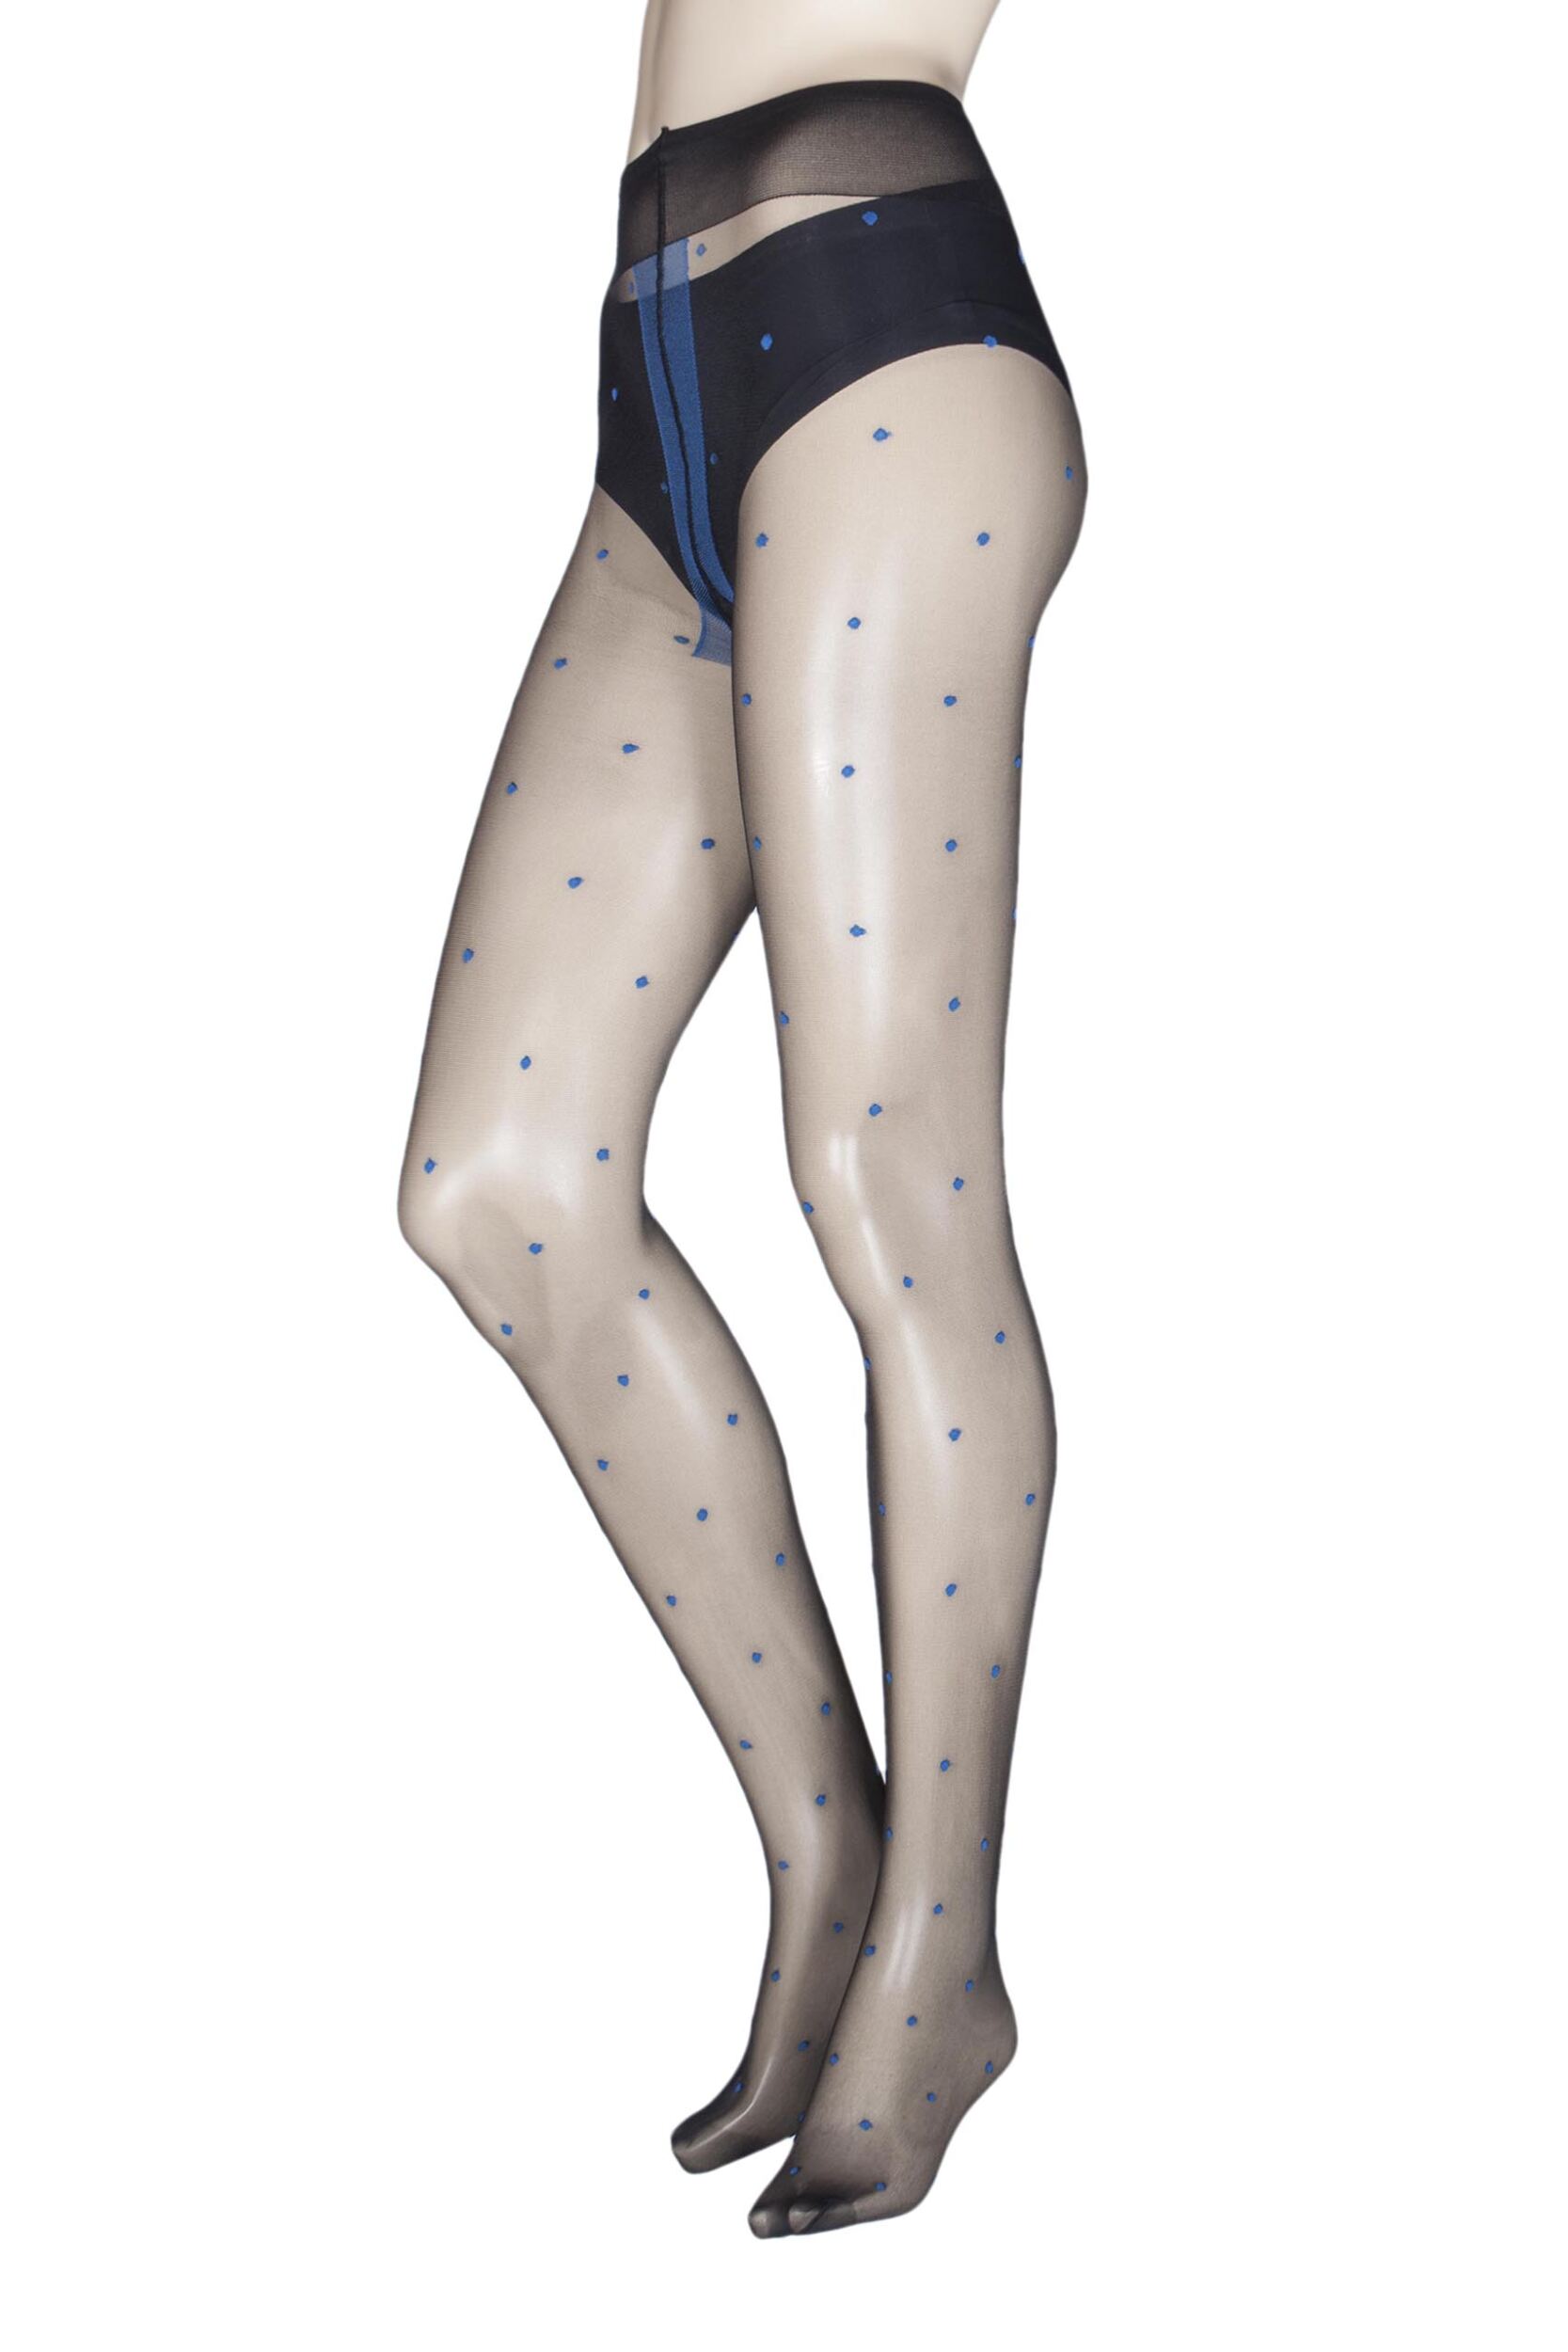 1 Pair Blue Anguria Spotted Tights Ladies Small - Trasparenze